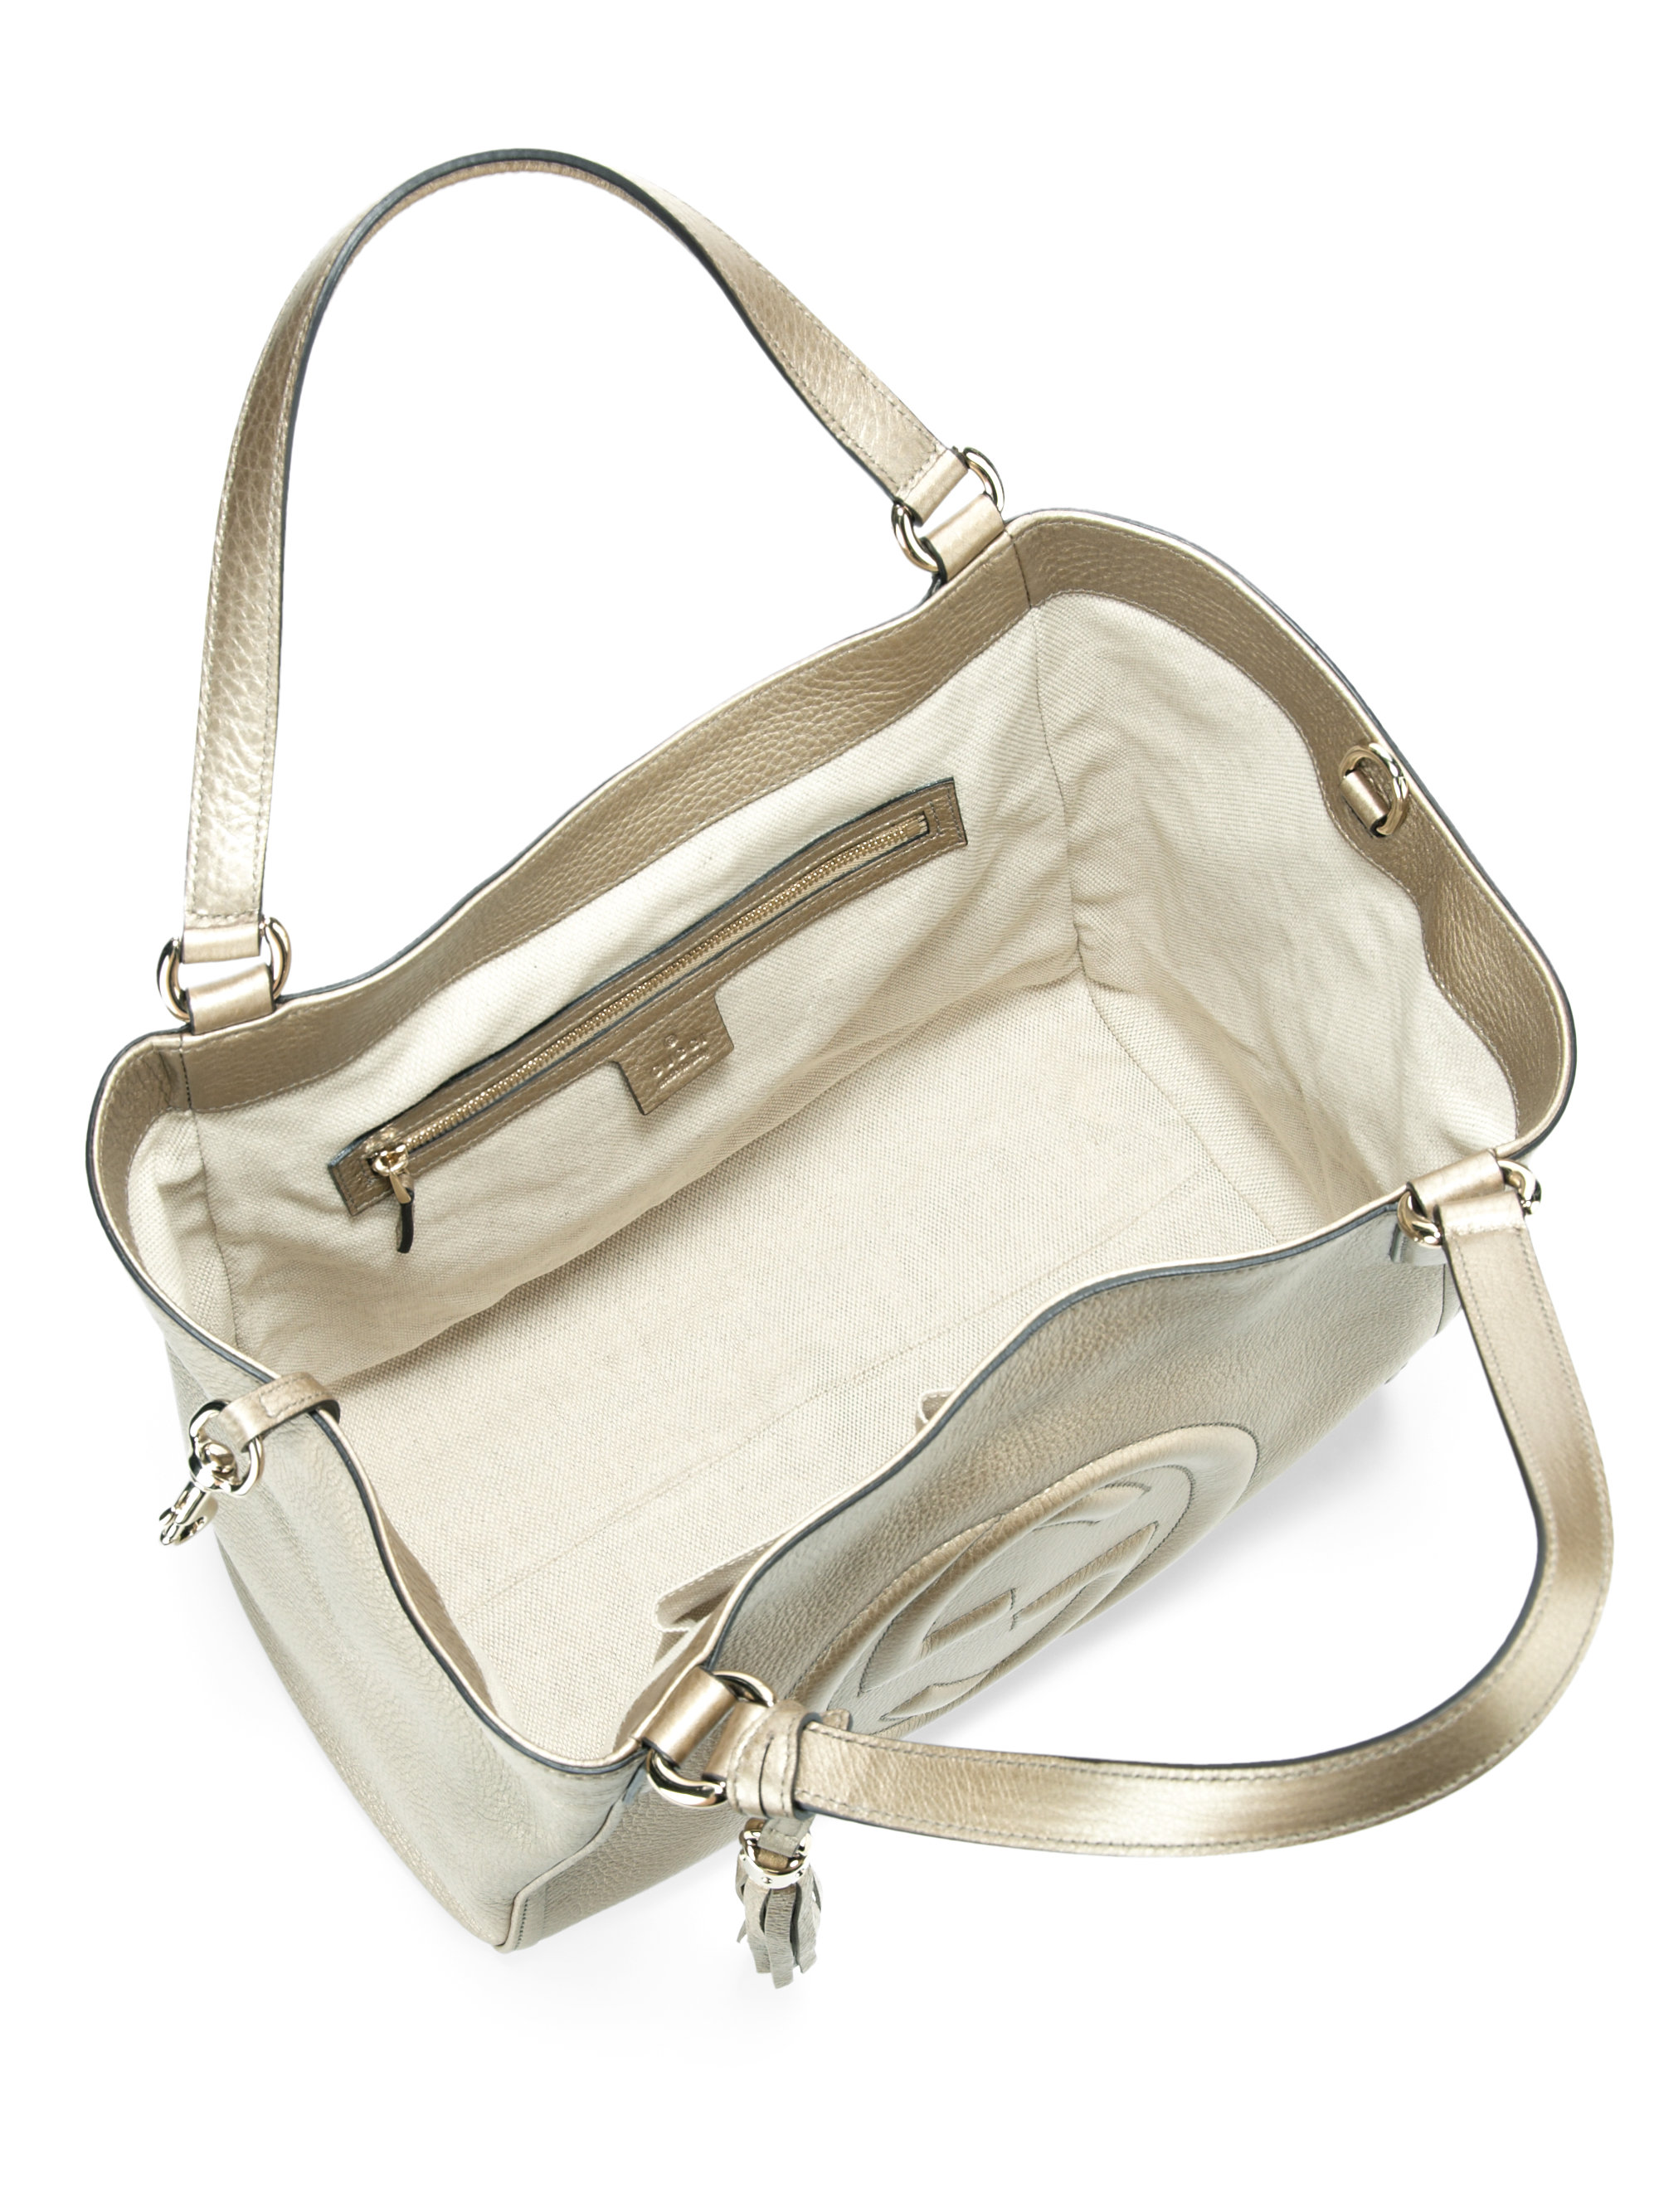 Lyst - Gucci Soho Metallic Leather Shoulder Bag in White